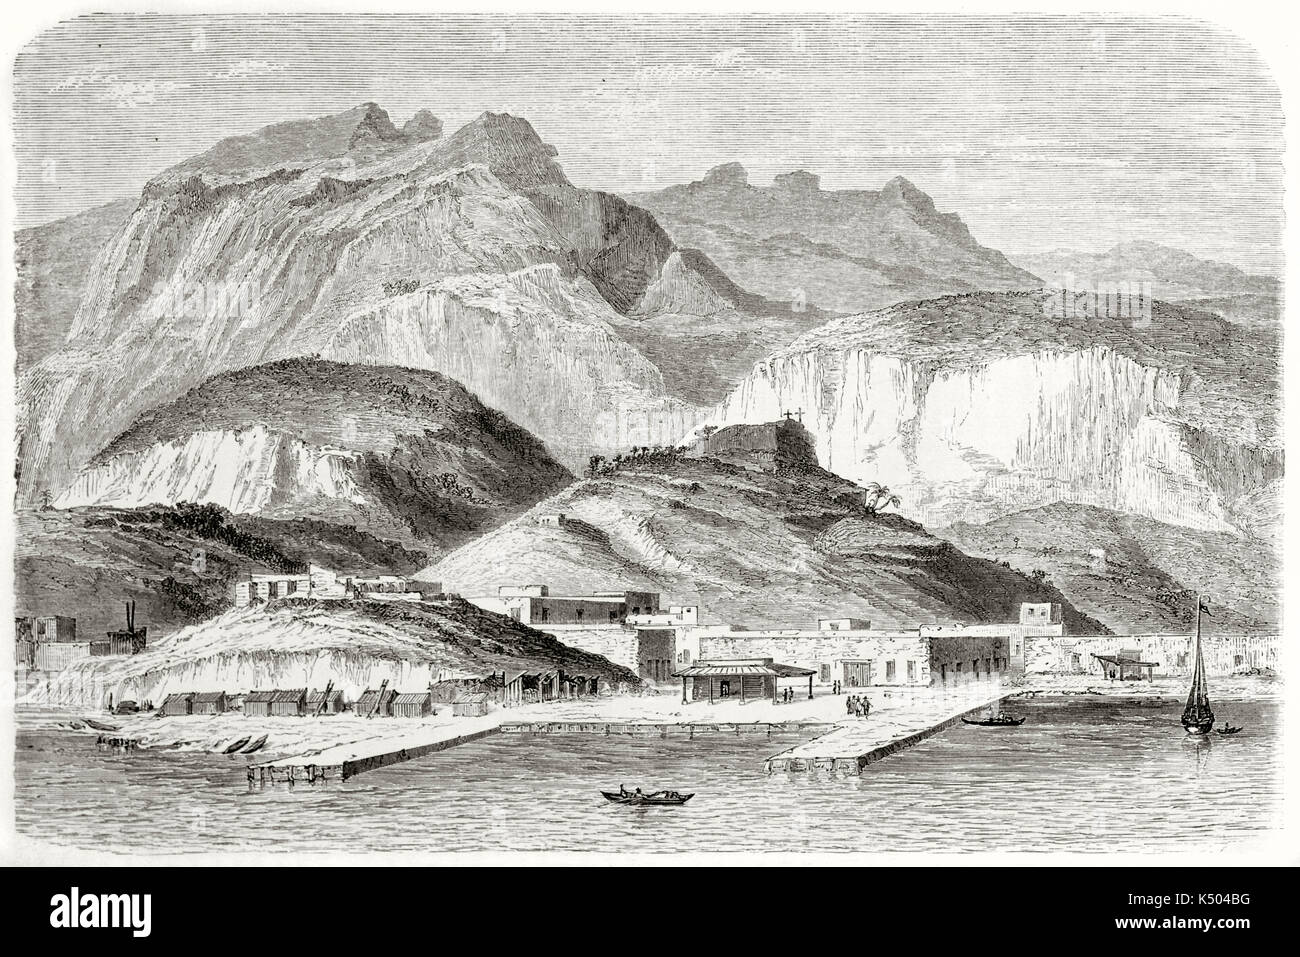 Ancient sea port with high hills behind, peaceful context in a mexican landscape. Old view Guaymas Sonora state Mexico. Created by Lancelot after Vigneaux published on Le Tour du Monde Paris 1862 Stock Photo